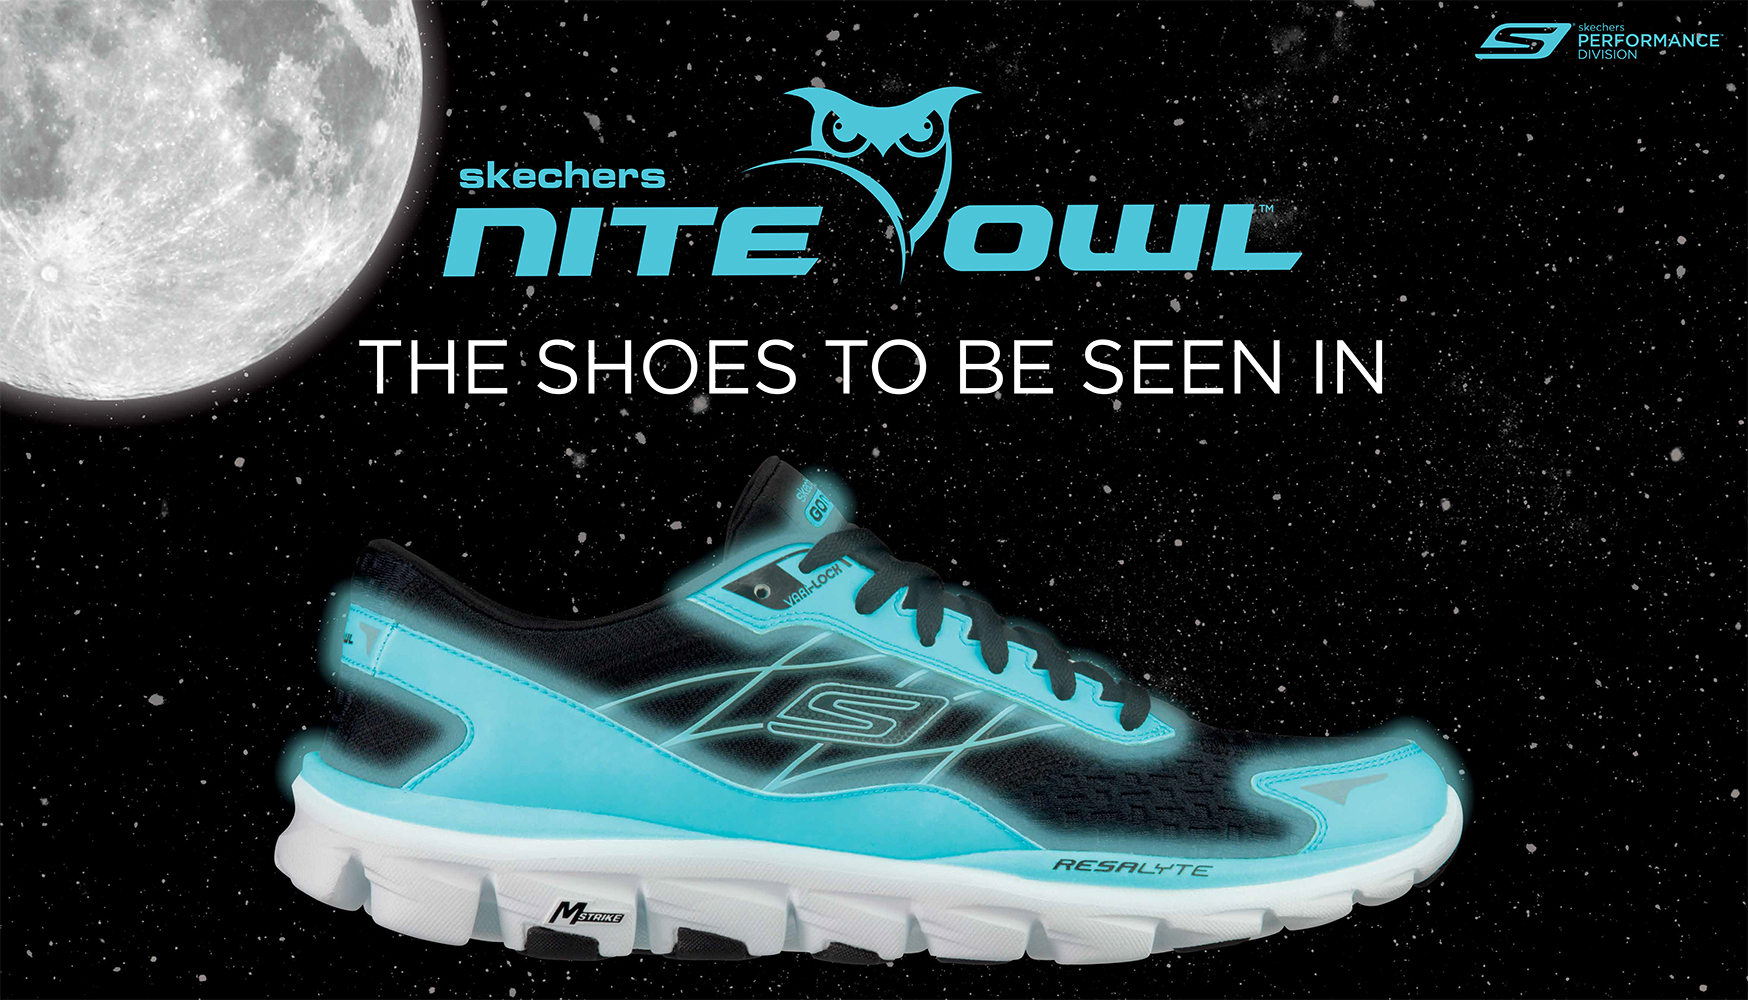 Skechers Performance Division Debuts the Nite Owl Footwear | Business Wire